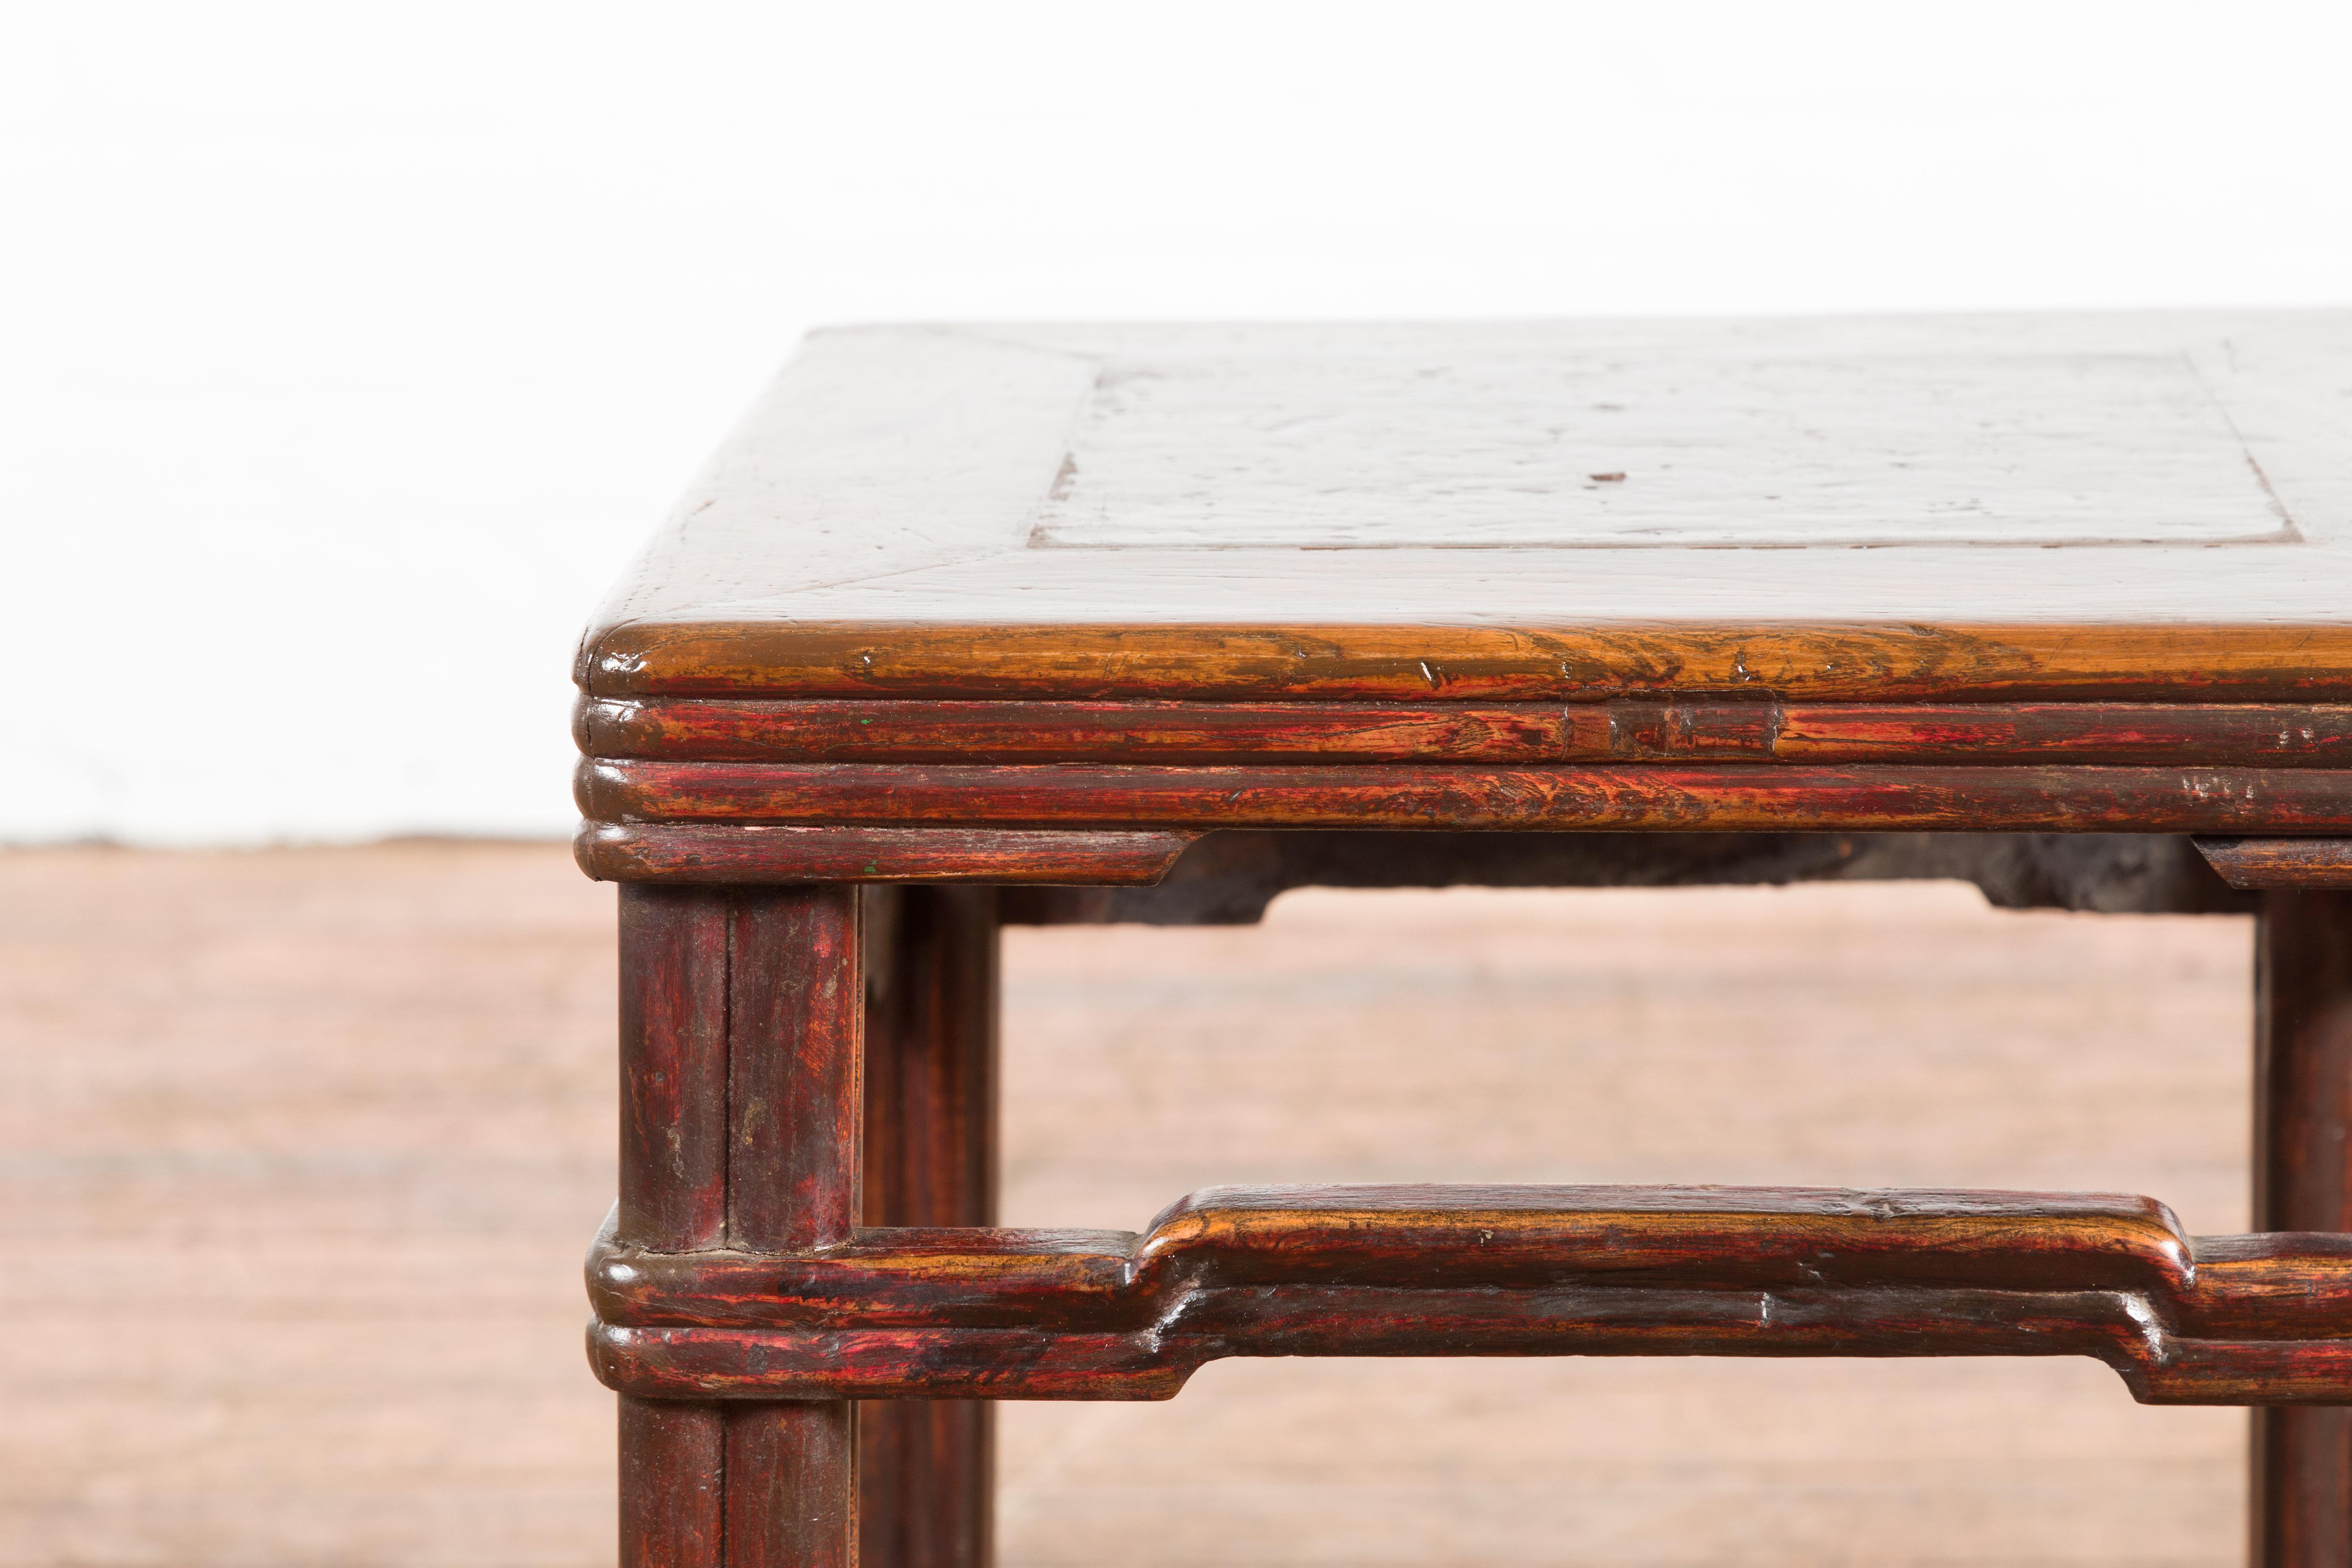 Wood Chinese Qing Dynasty Period 19th Century Side Table with Humpback Stretchers For Sale